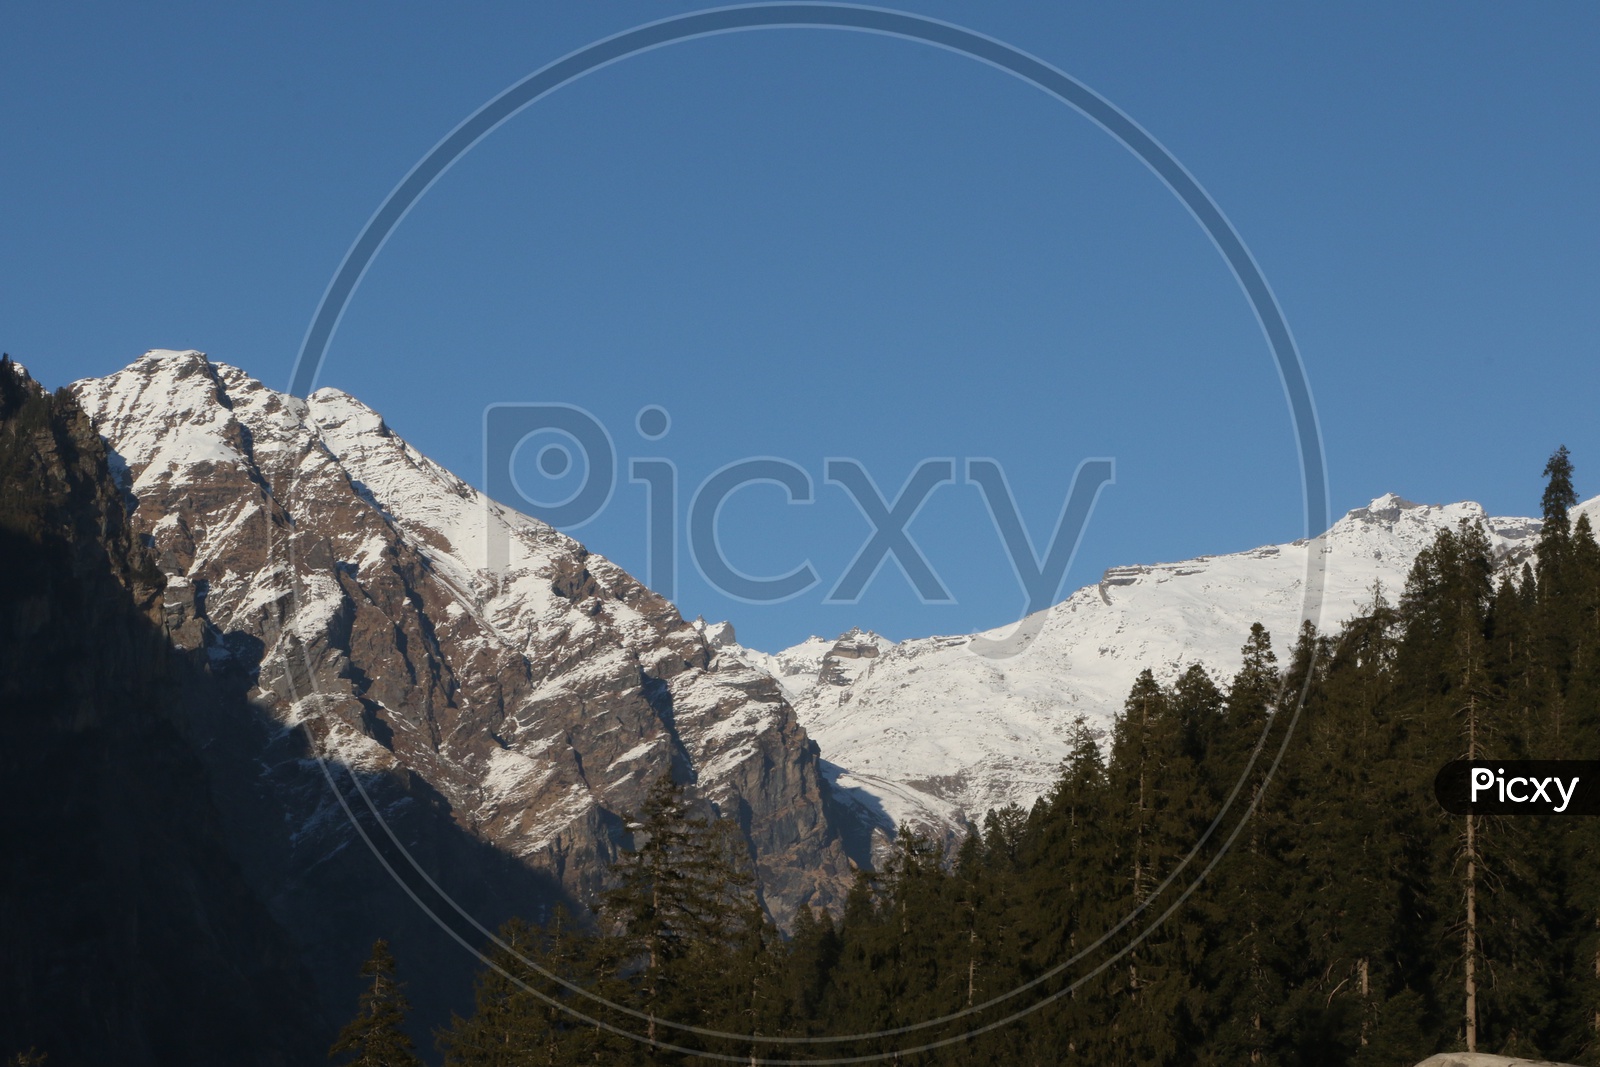 Landscapes of Manali - Snow capped Mountains & Trees